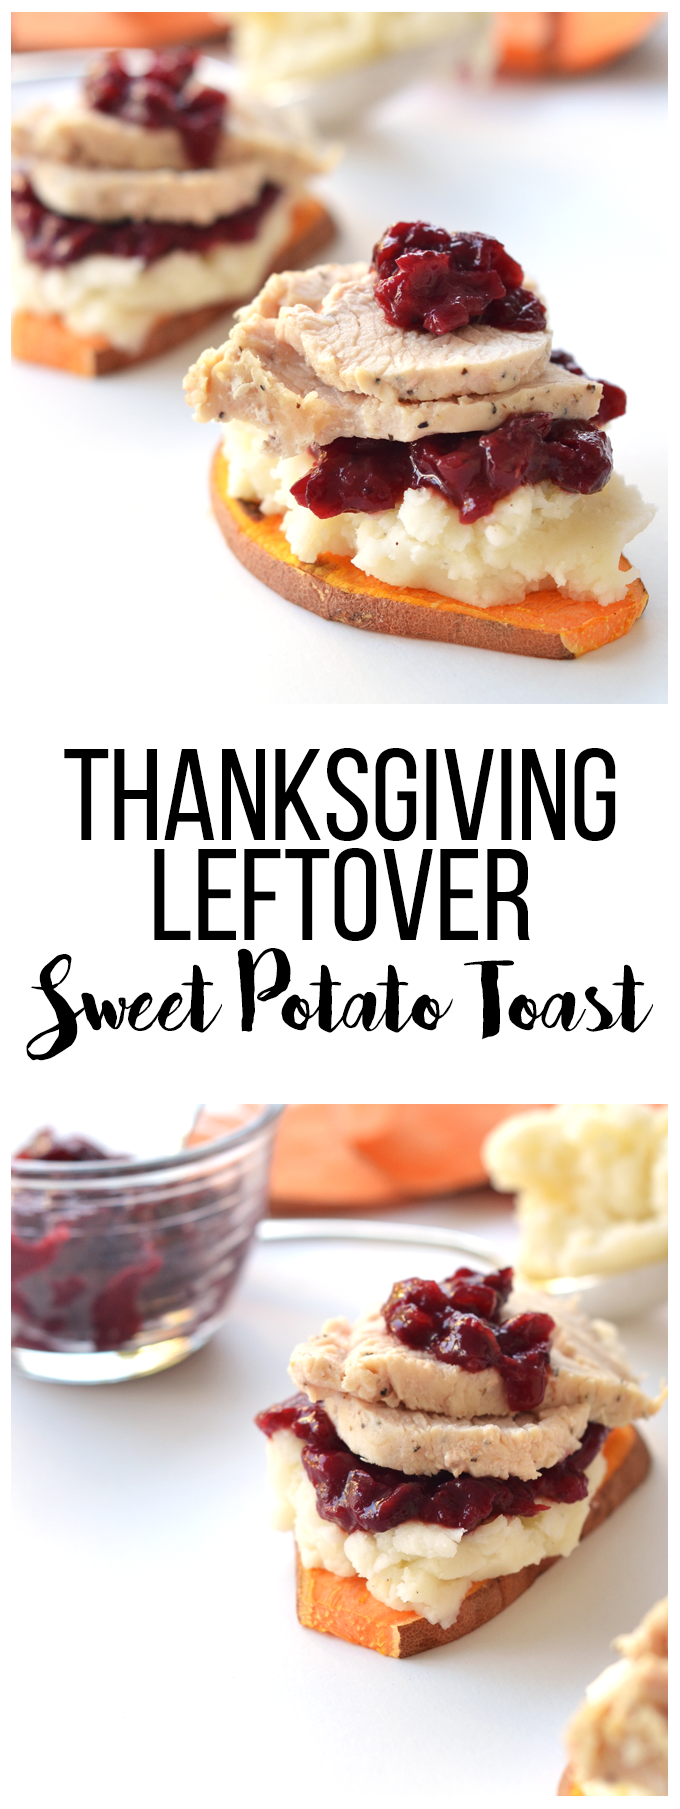 This Thanksgiving Leftover Sweet Potato Toast is a great way to use up your thanksgiving leftovers in a healthy way!